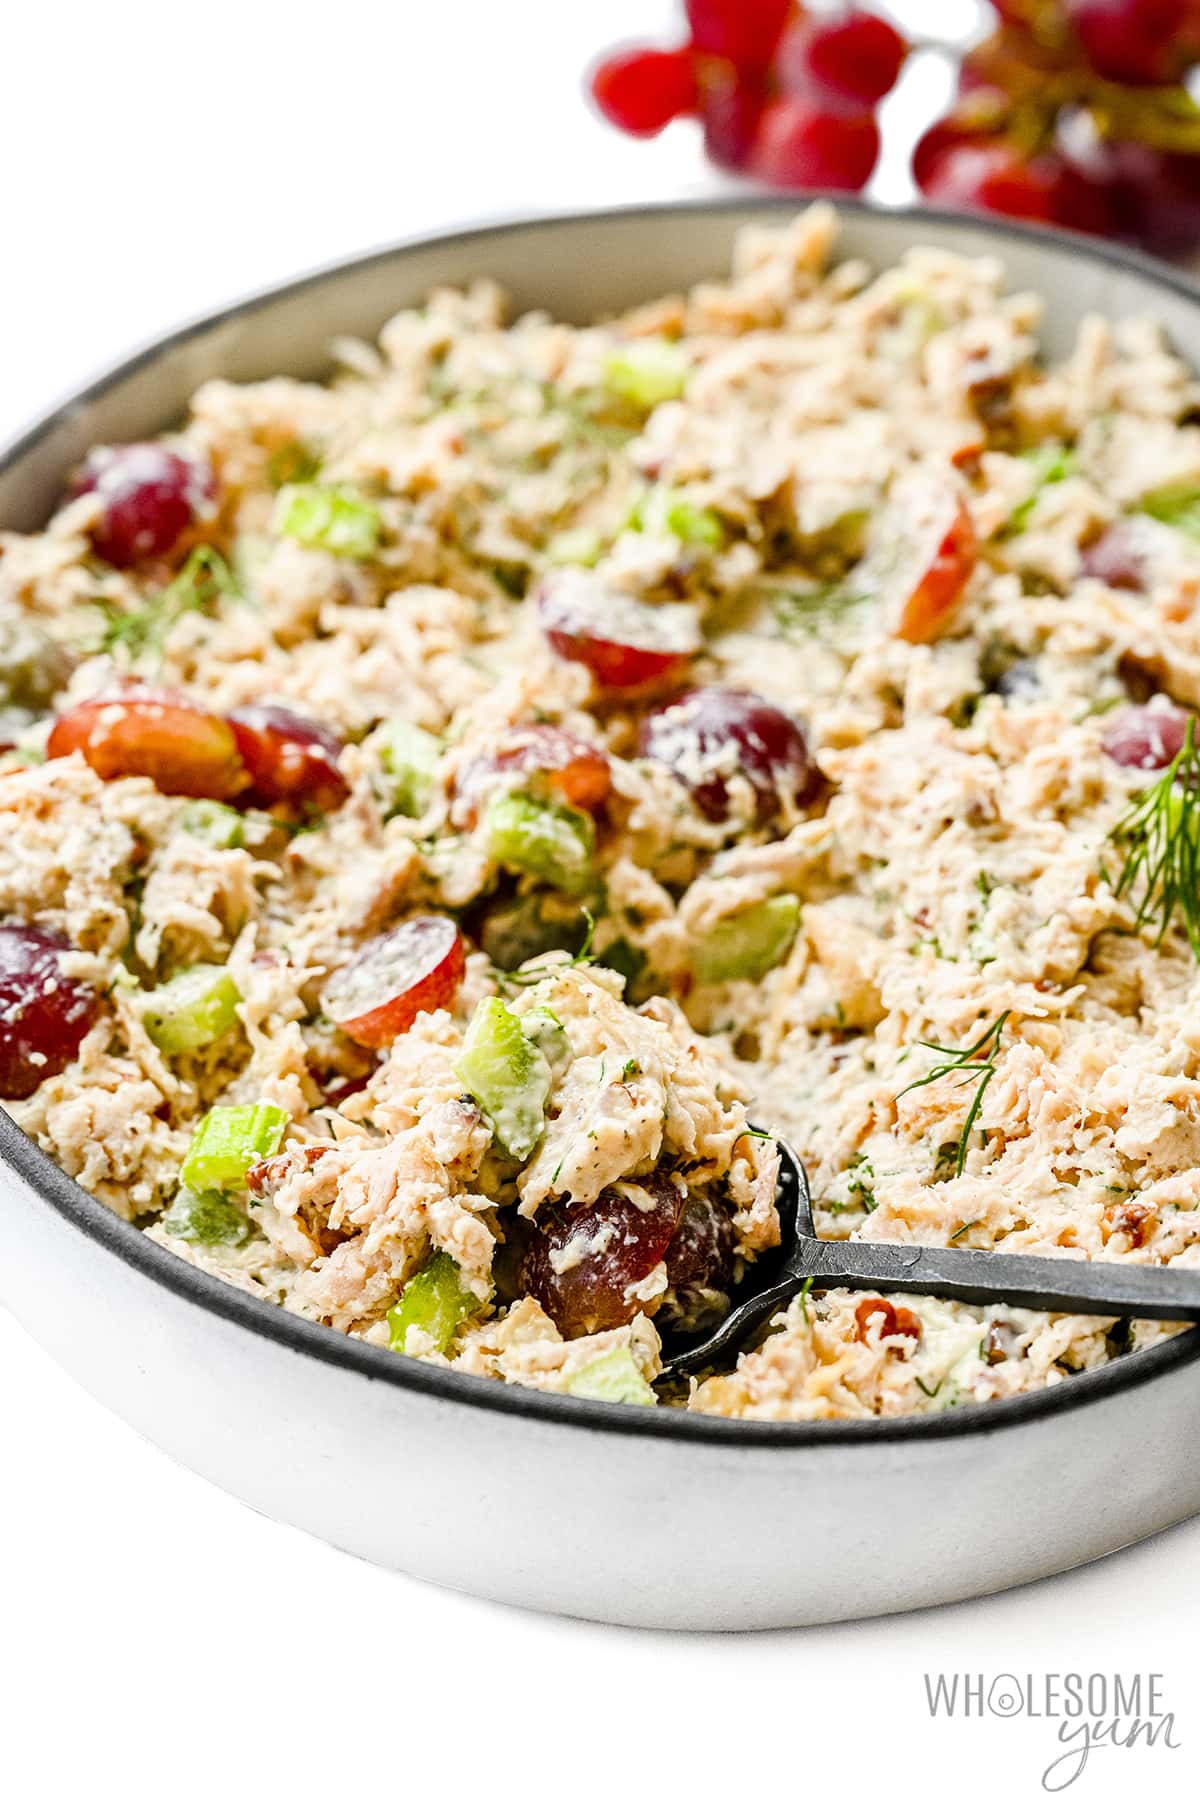 The best chicken salad recipe in a bowl.